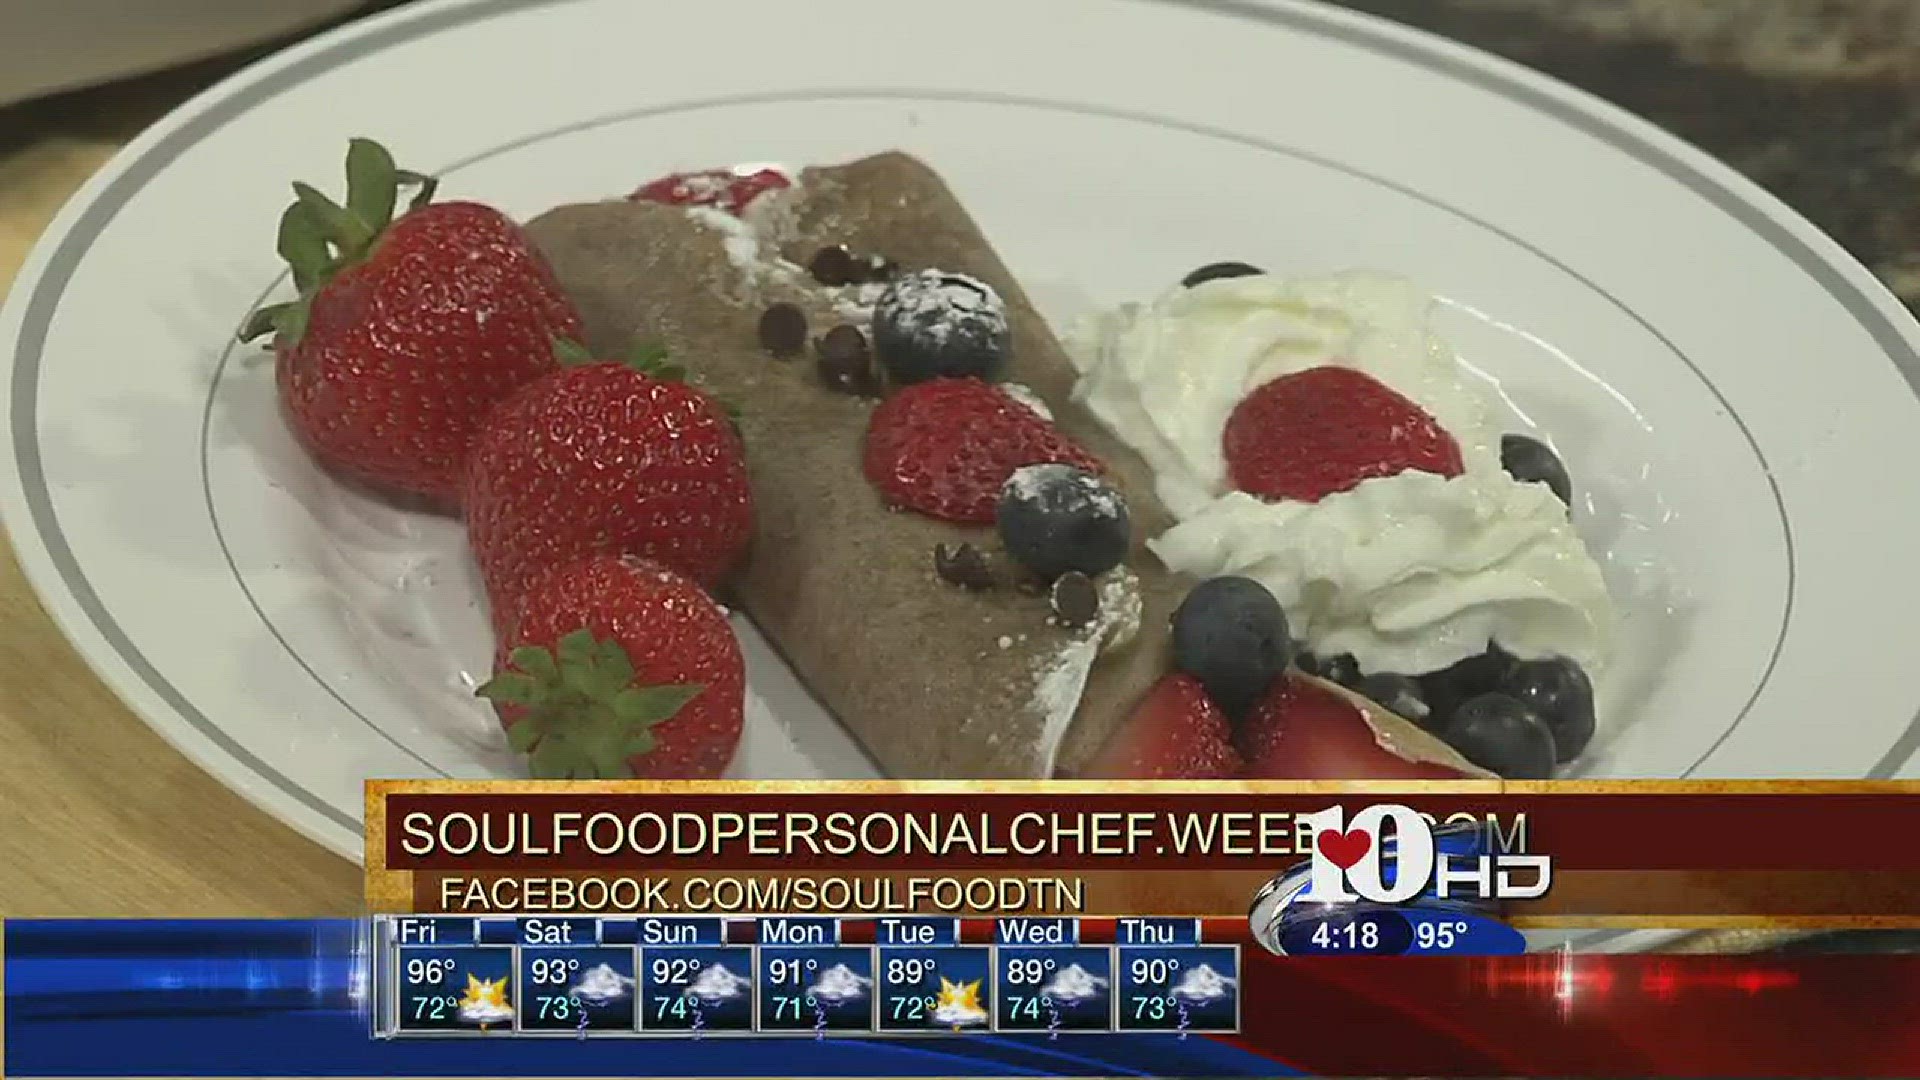 July 21, 2016Live at Five at 4Jes Thomas is a personal chef. Her Business is Soul Food: A Personal Chef Service. For more information follow her on Social Media: soulfoodpersonalchef.weebly.com or Facebook.com/soulfoodtn